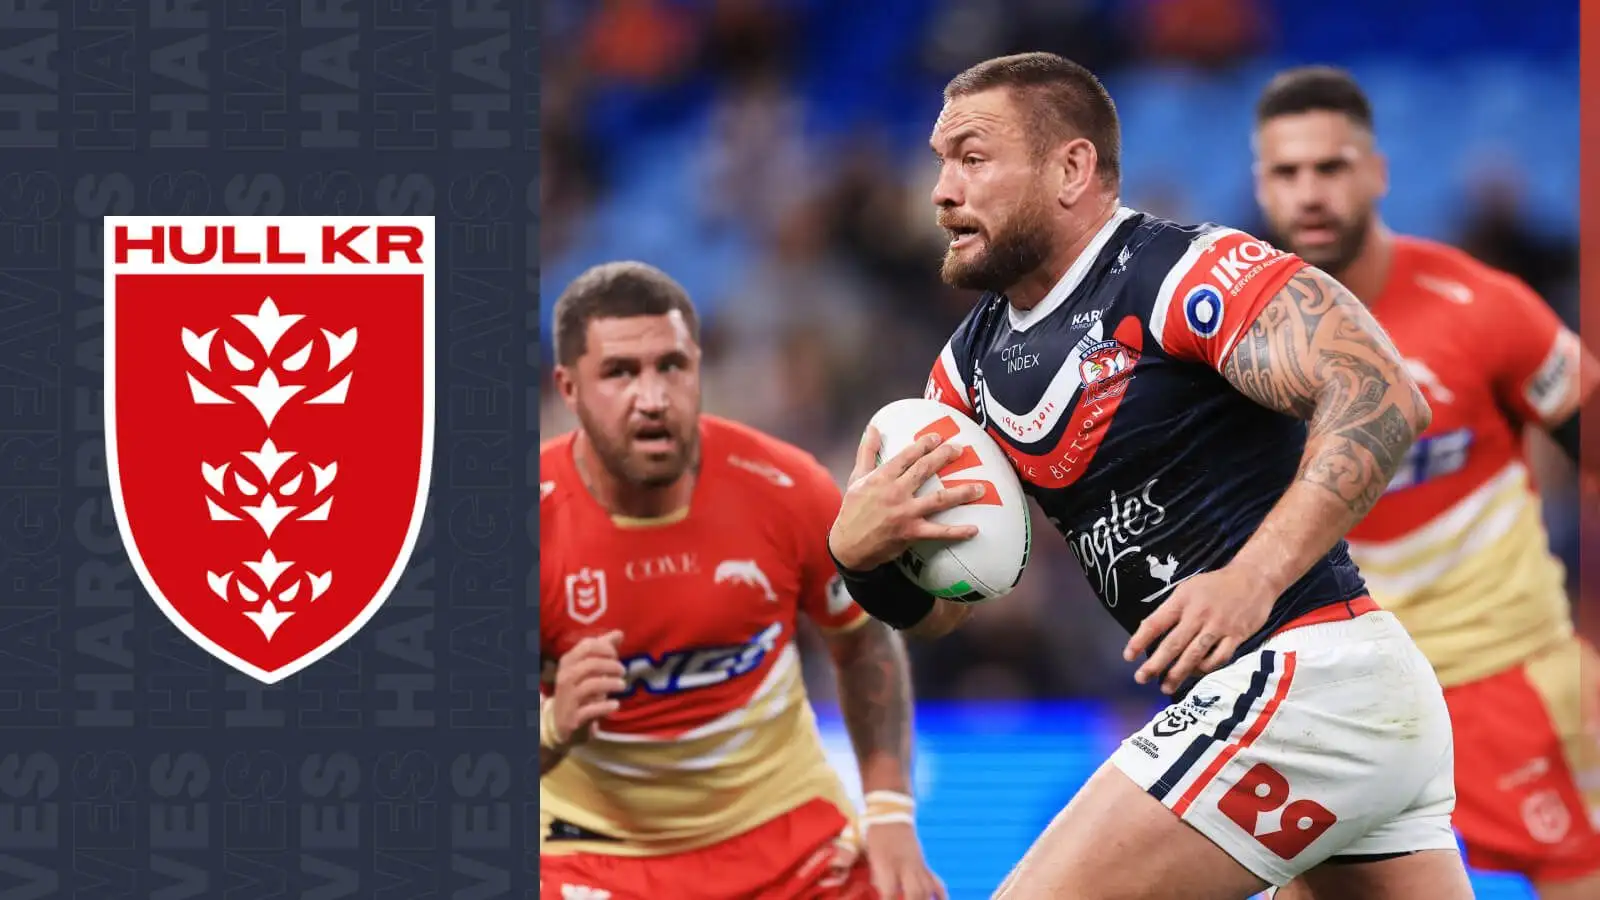 Hull KR pull off major coup with signing of New Zealand powerhouse Jared Waerea-Hargreaves